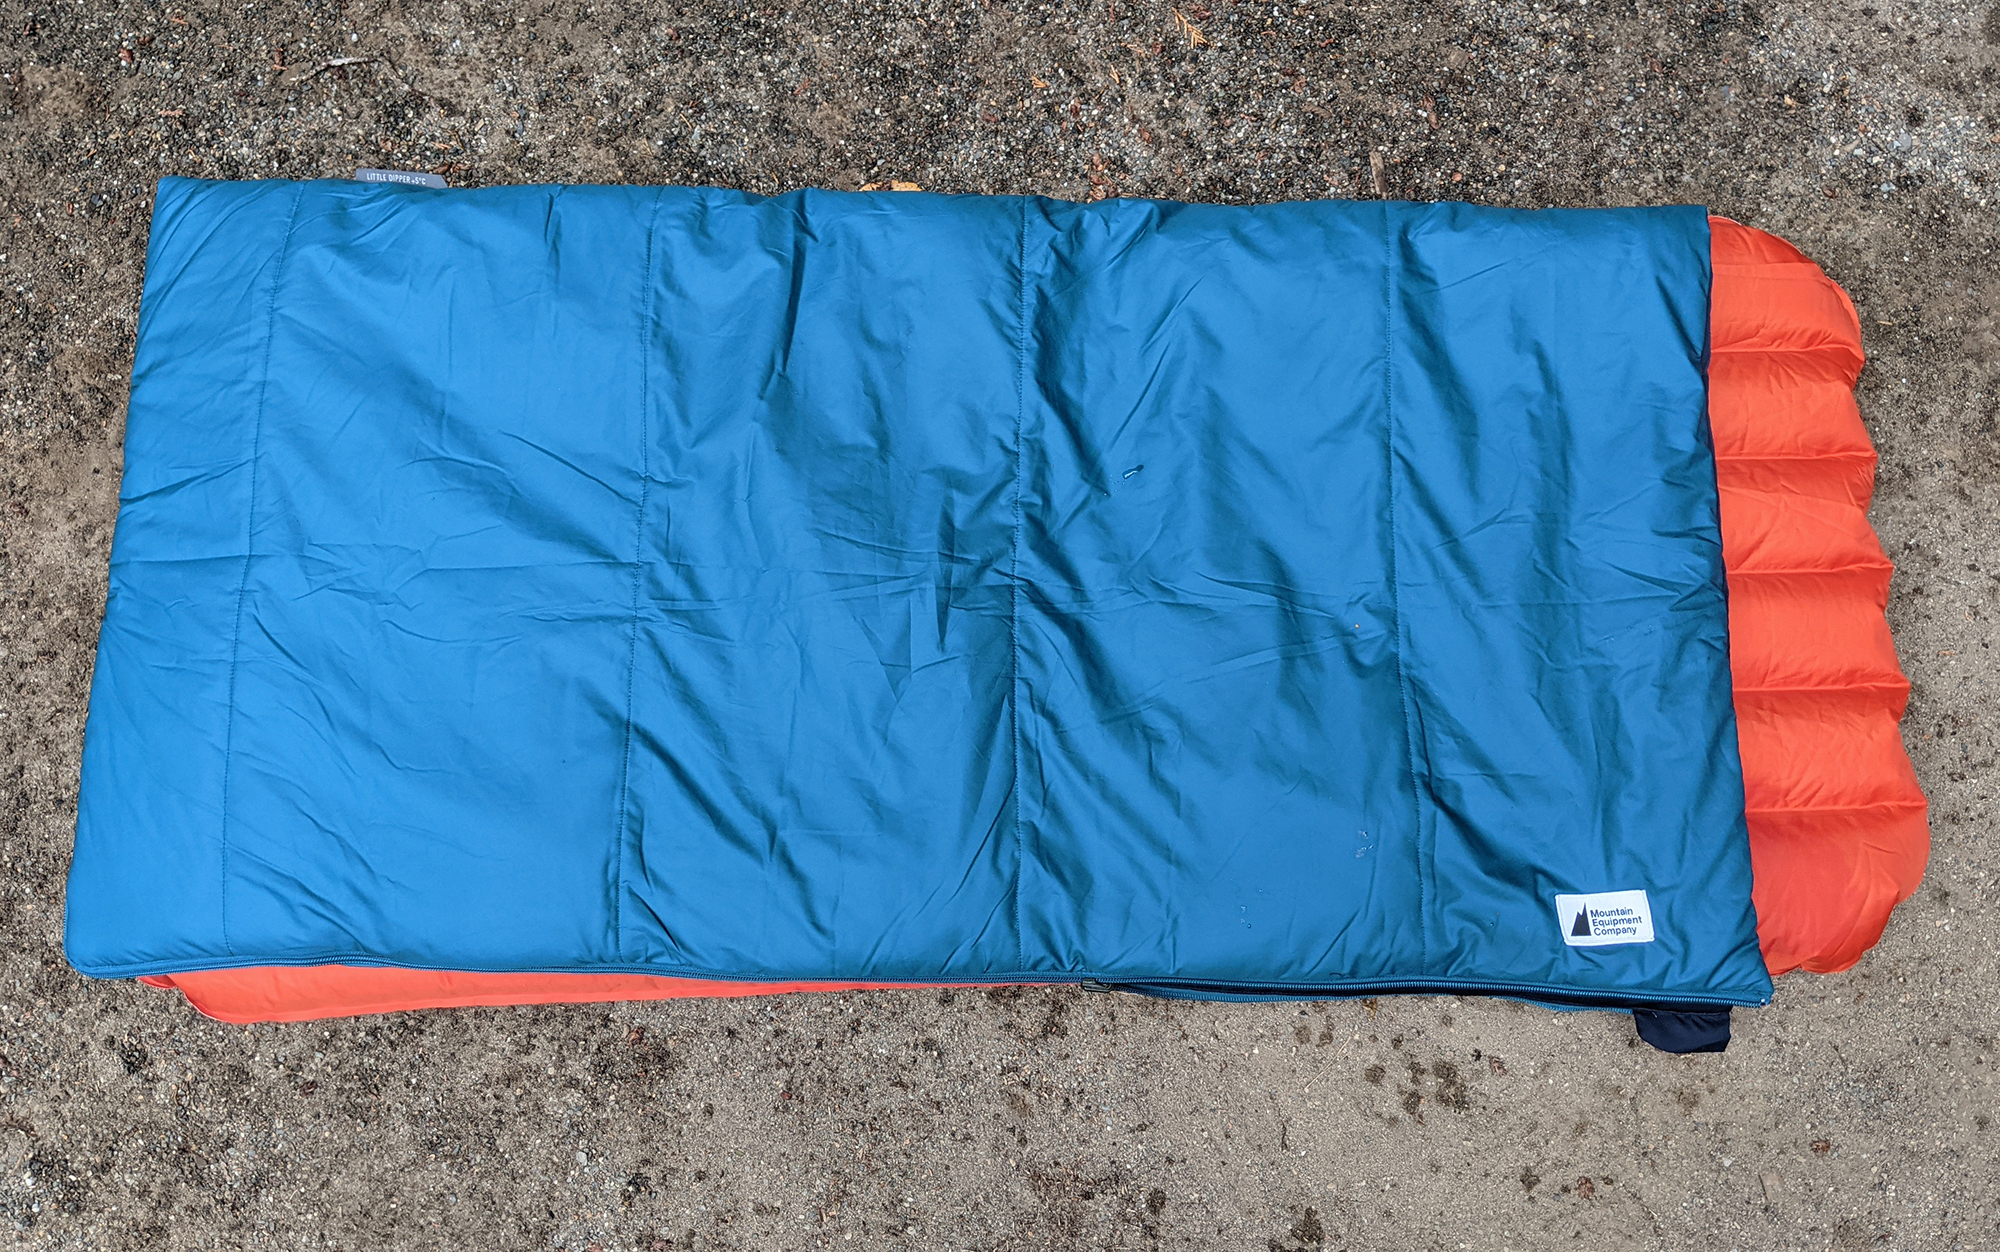 The MEC Little Dipper looks exactly like what you expect a children’s sleeping bag to look like.